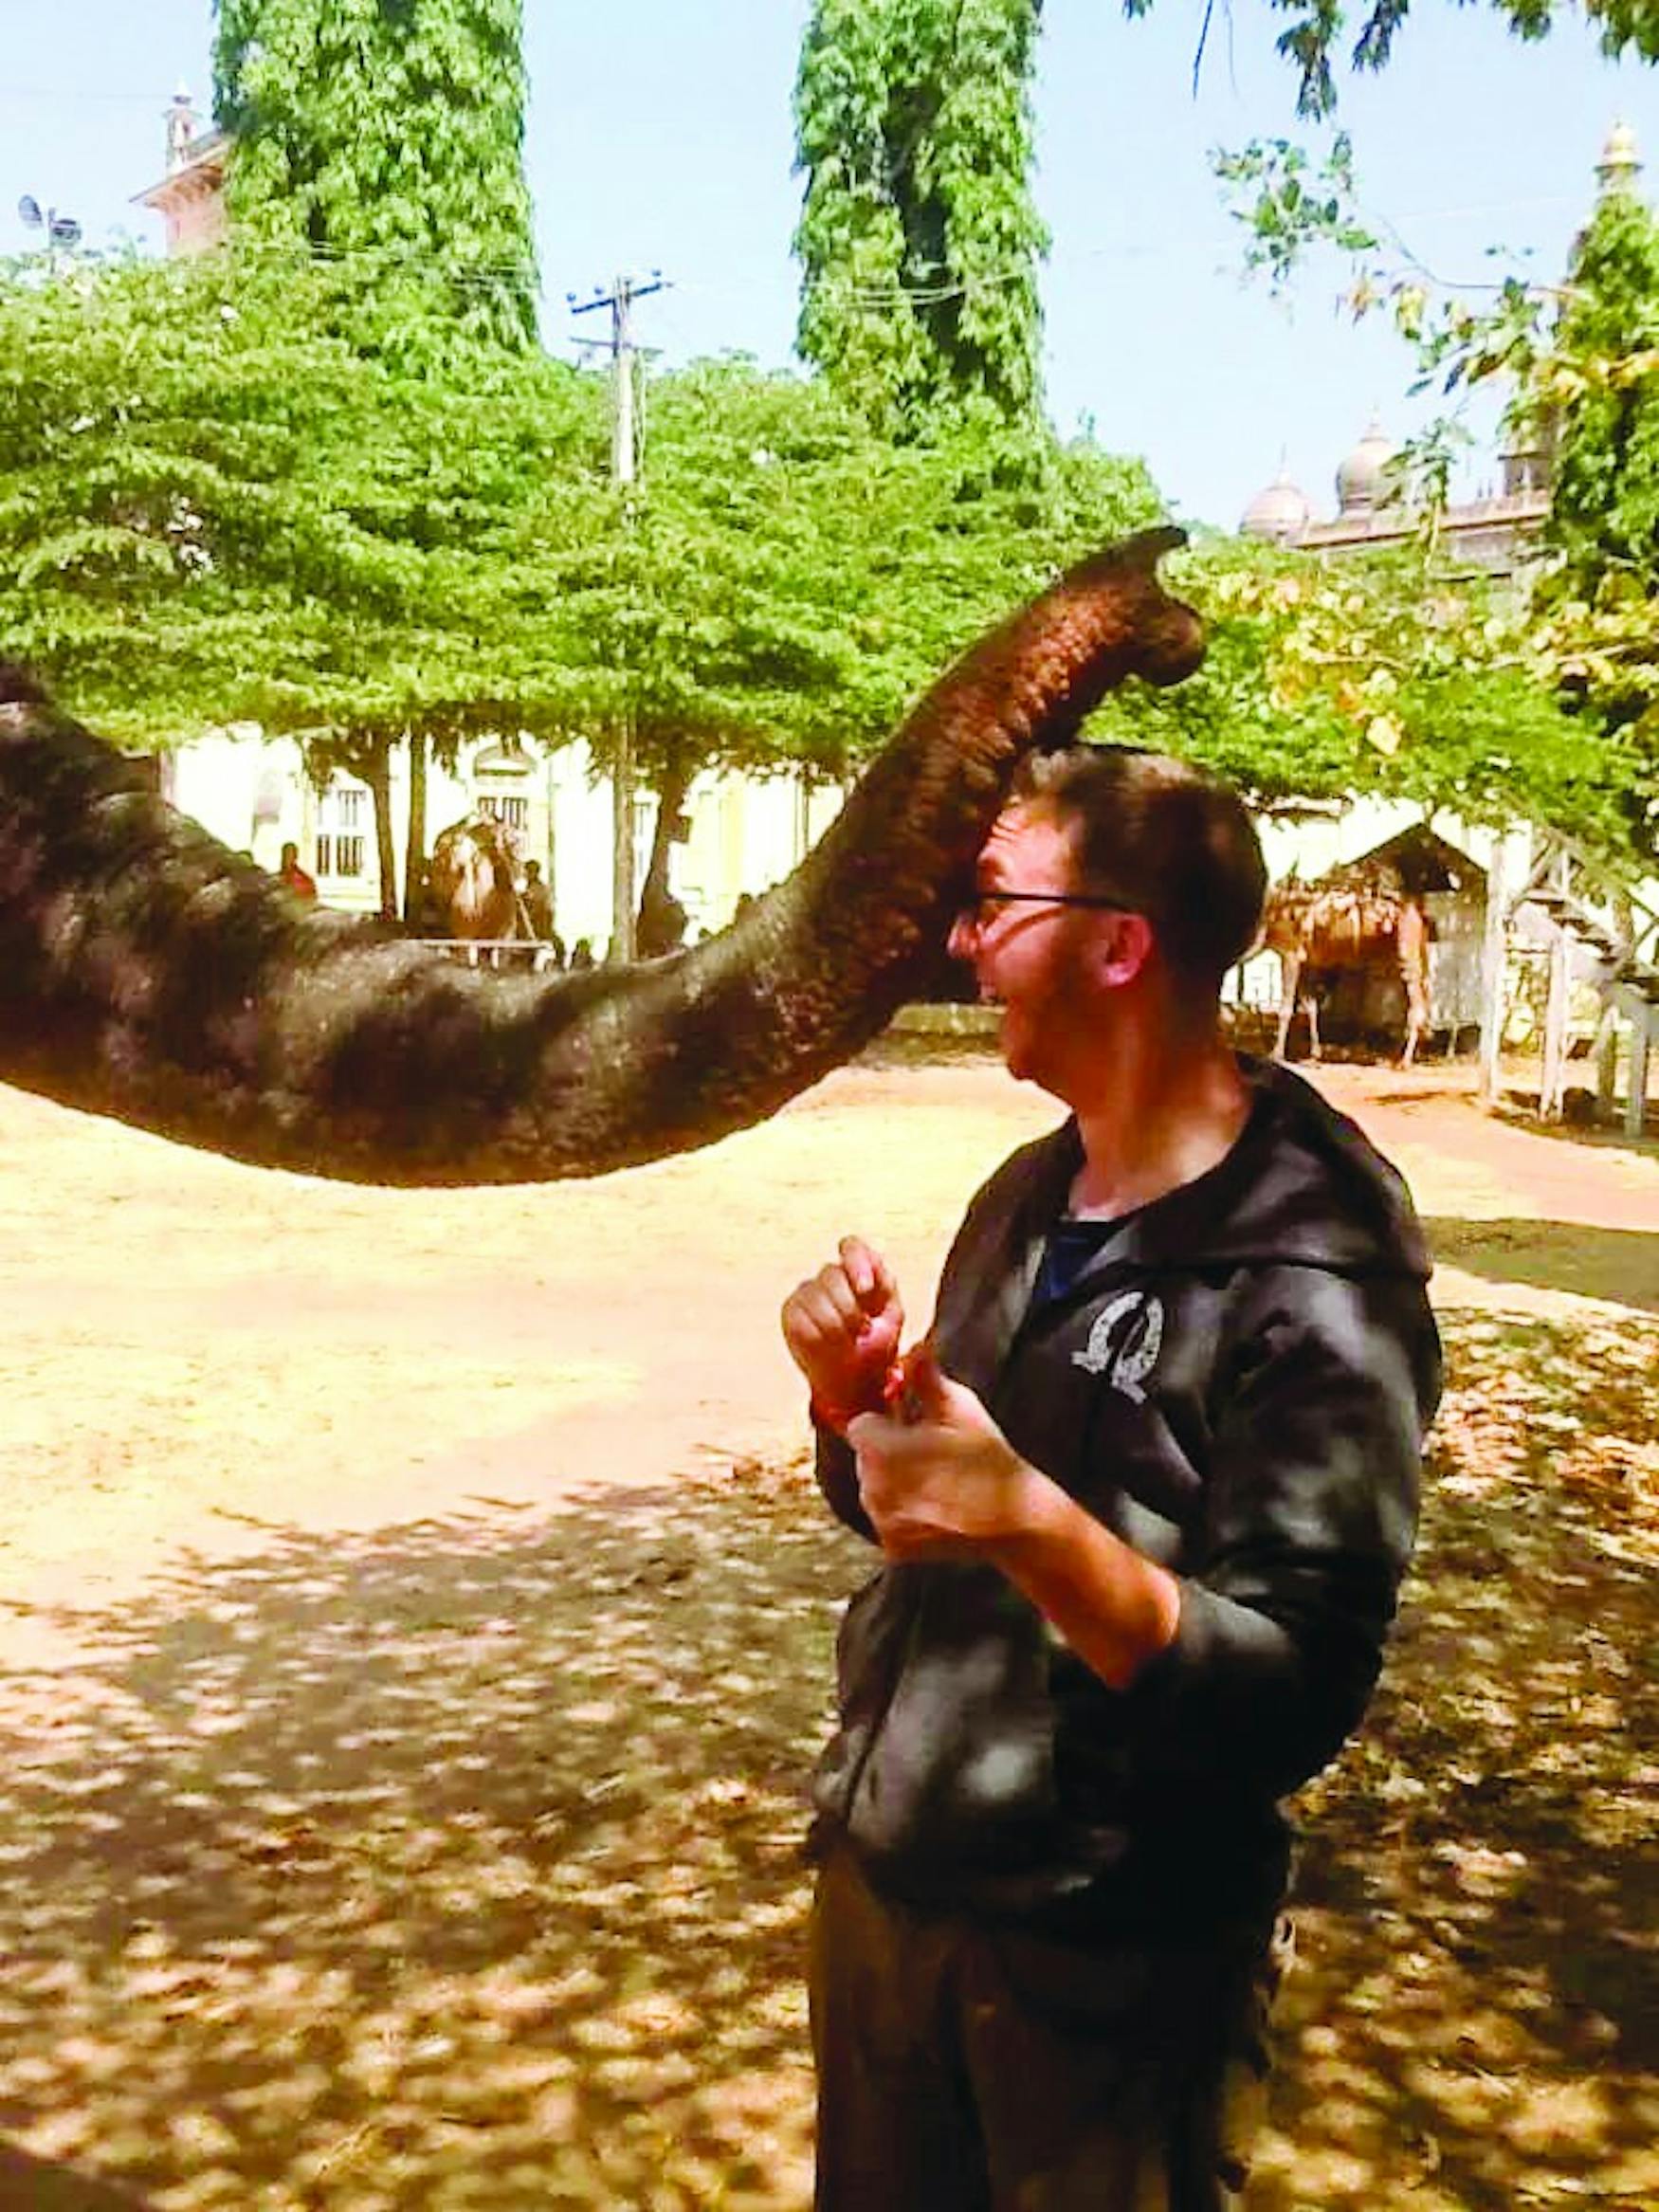 Jake Cohen ’15, a student of physics and mathematics, was blessed by an elephant during his study abroad term in Bangalore, India.